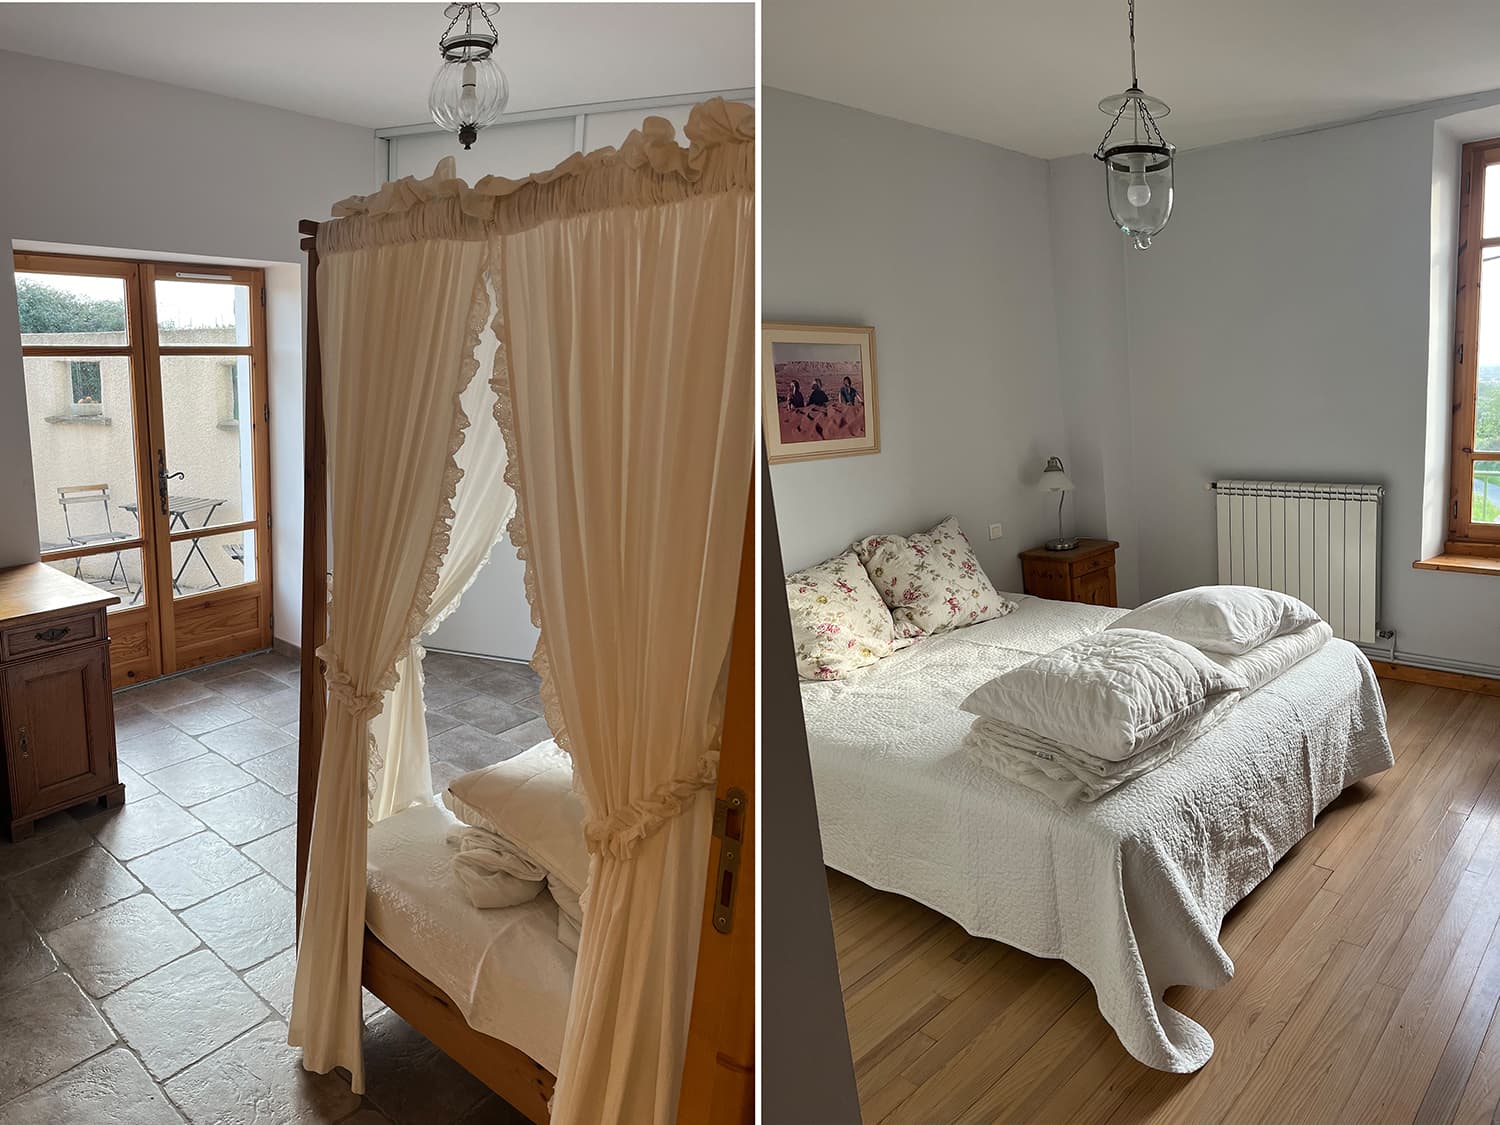 Bedrooms | Holiday accommodation in South of France